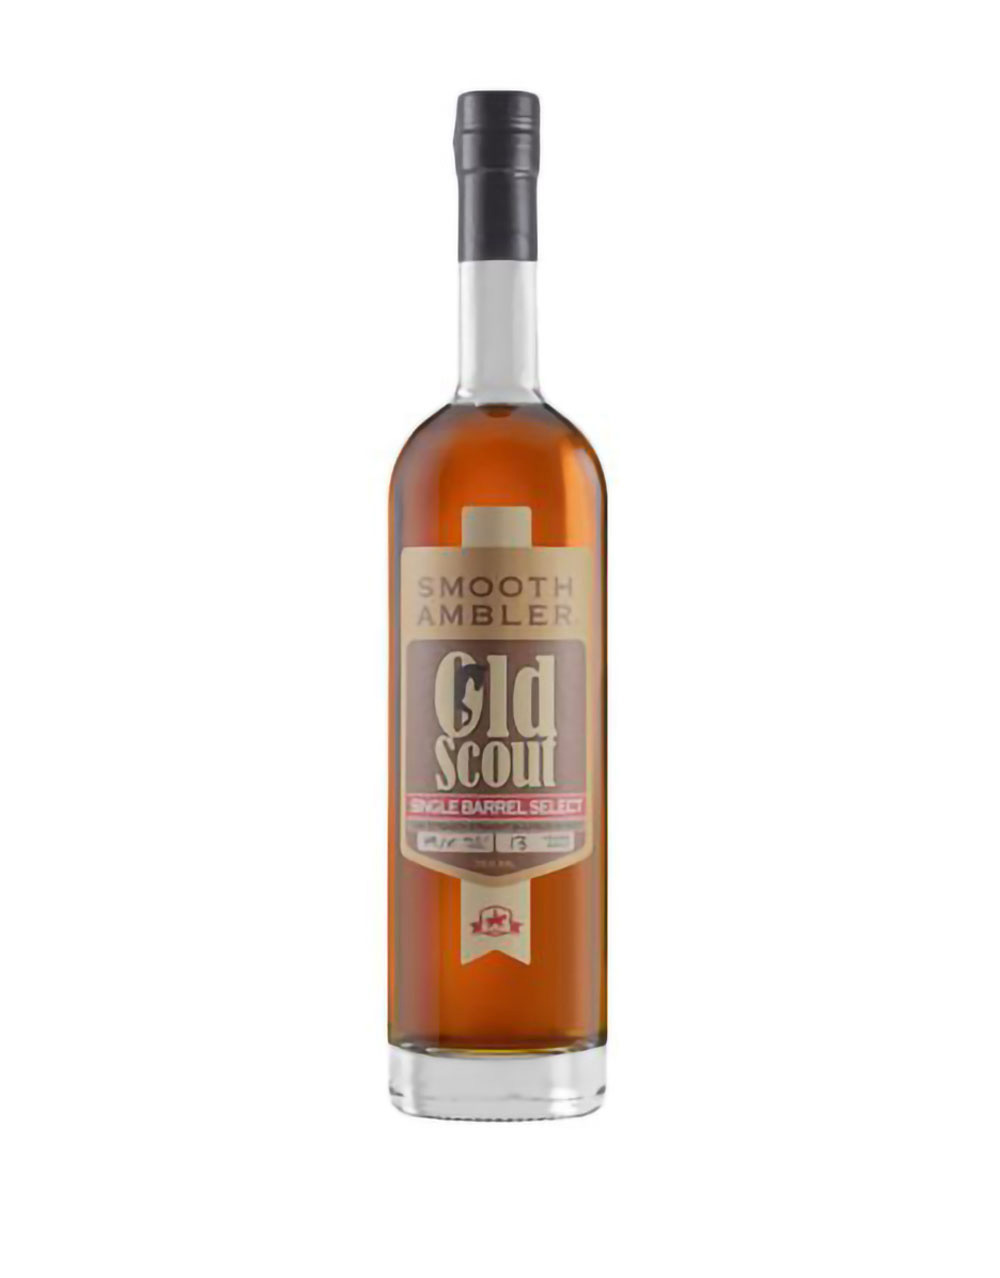 Smooth Ambler Old Scout Single Barrel Select 13 Year Bourbon Whiskey